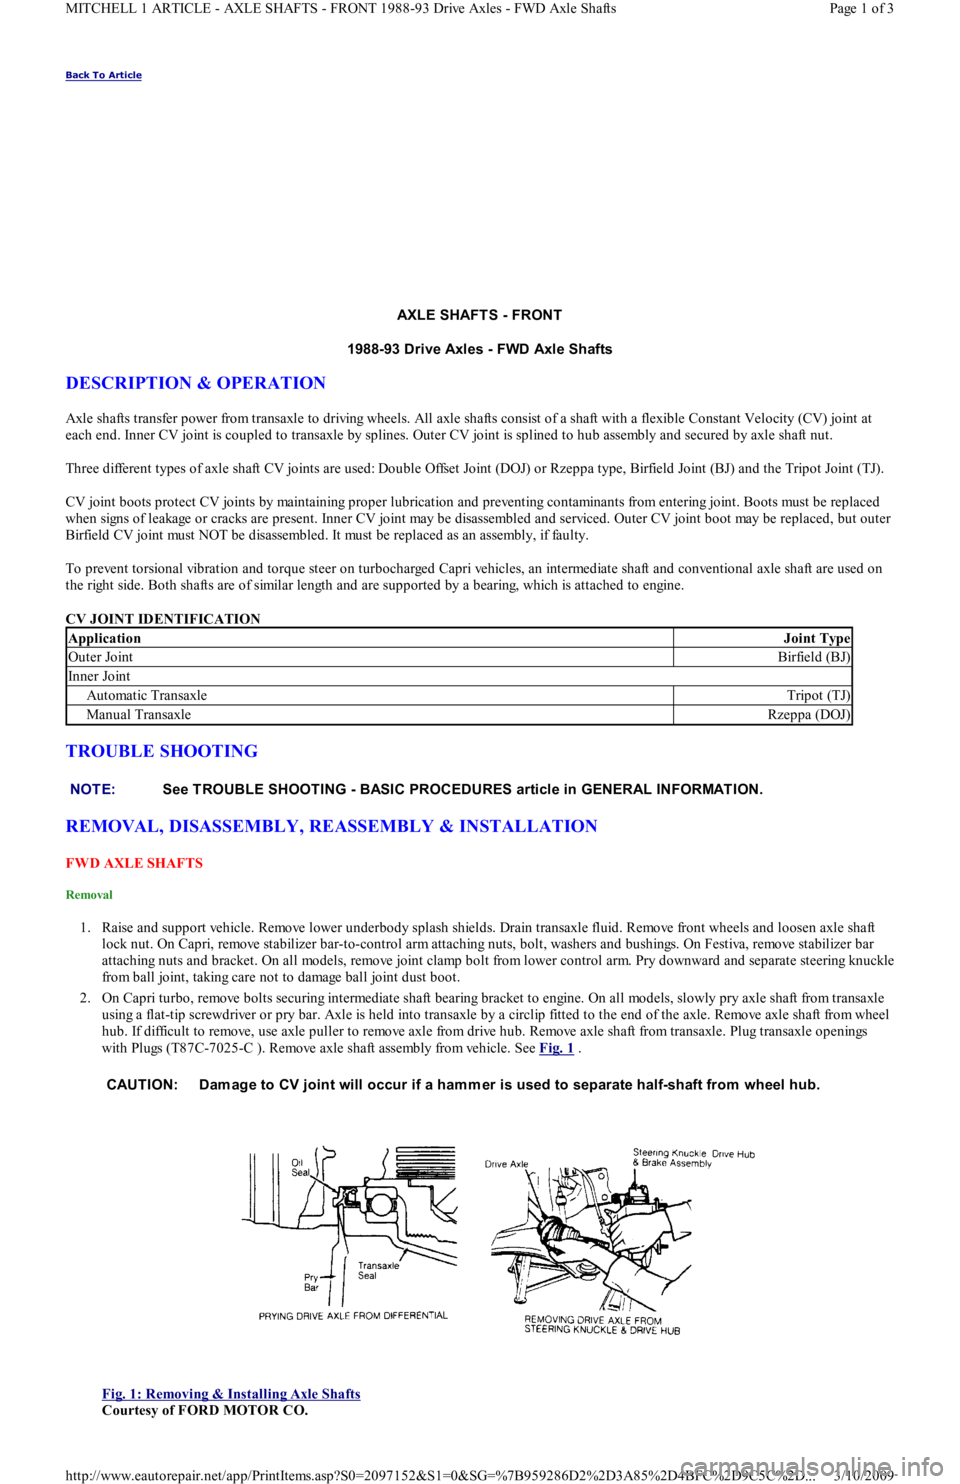 FORD FESTIVA 1991  Service Manual Back To Article 
AXLE SHAFT S - FRONT  
1988-93 Drive Axles - FWD Axle Shafts 
DESCRIPTION & OPERATION 
Axle shafts transfer power from transaxle to driving wheels. All axle shafts consist of a shaft 